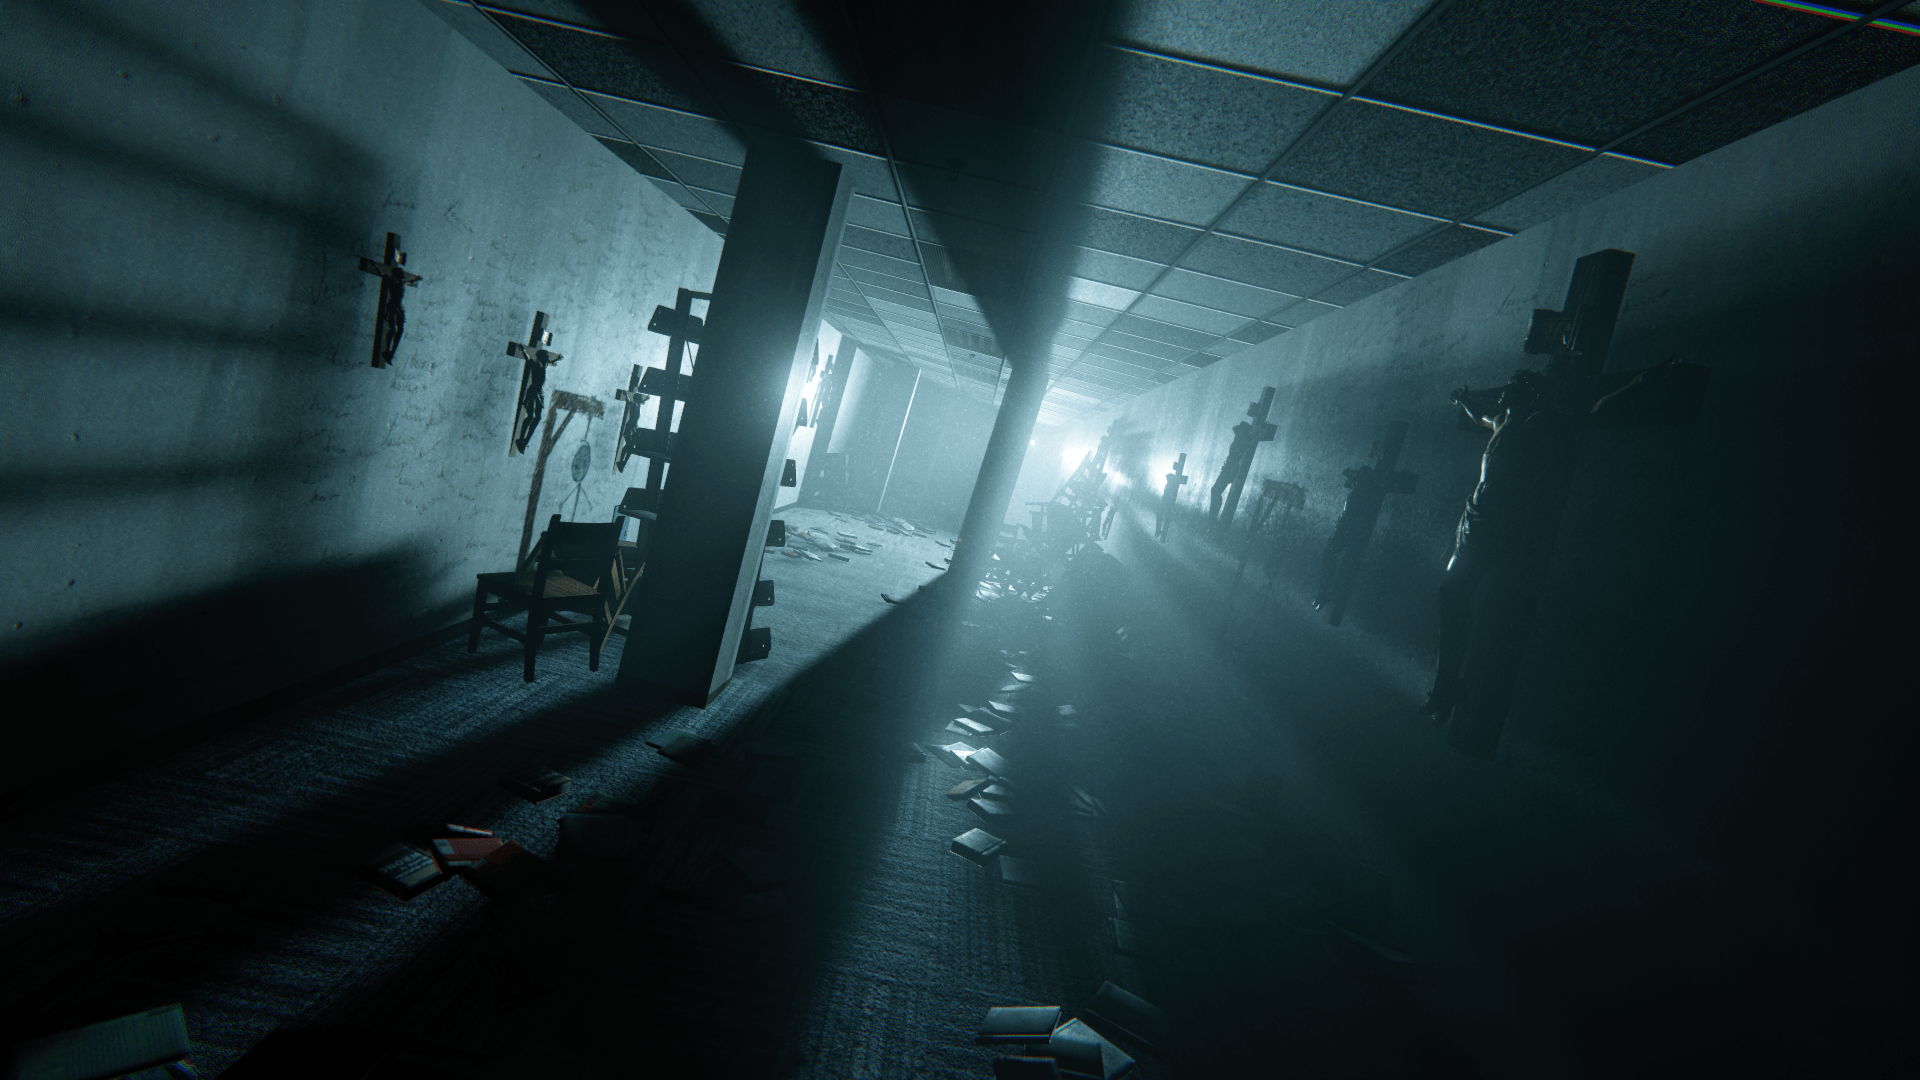 outlast 2 png